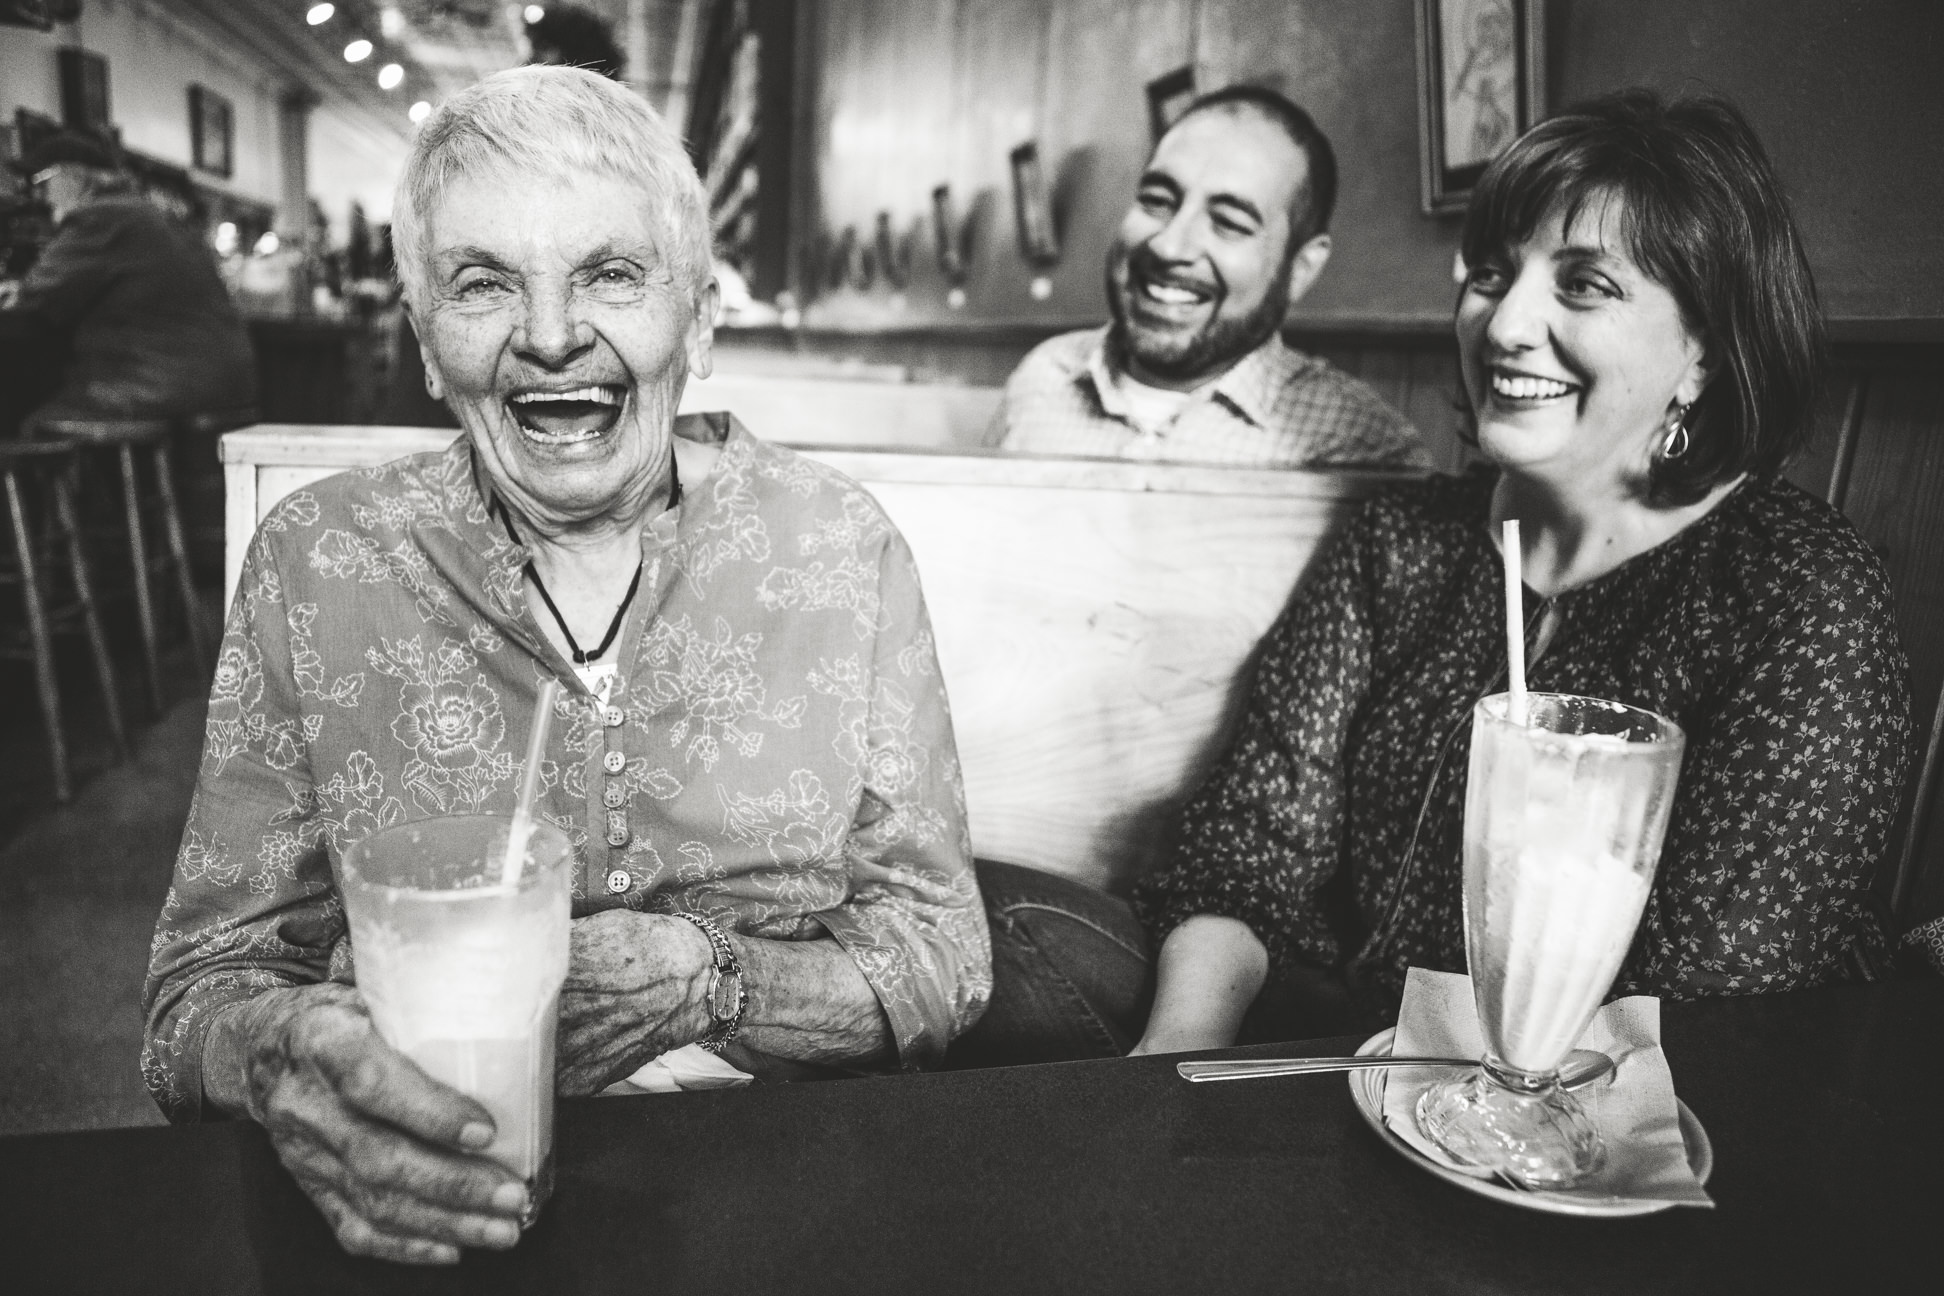 A grandmother and her family enjoy milkshakes at Butterfly Herbs in Missoula Montana